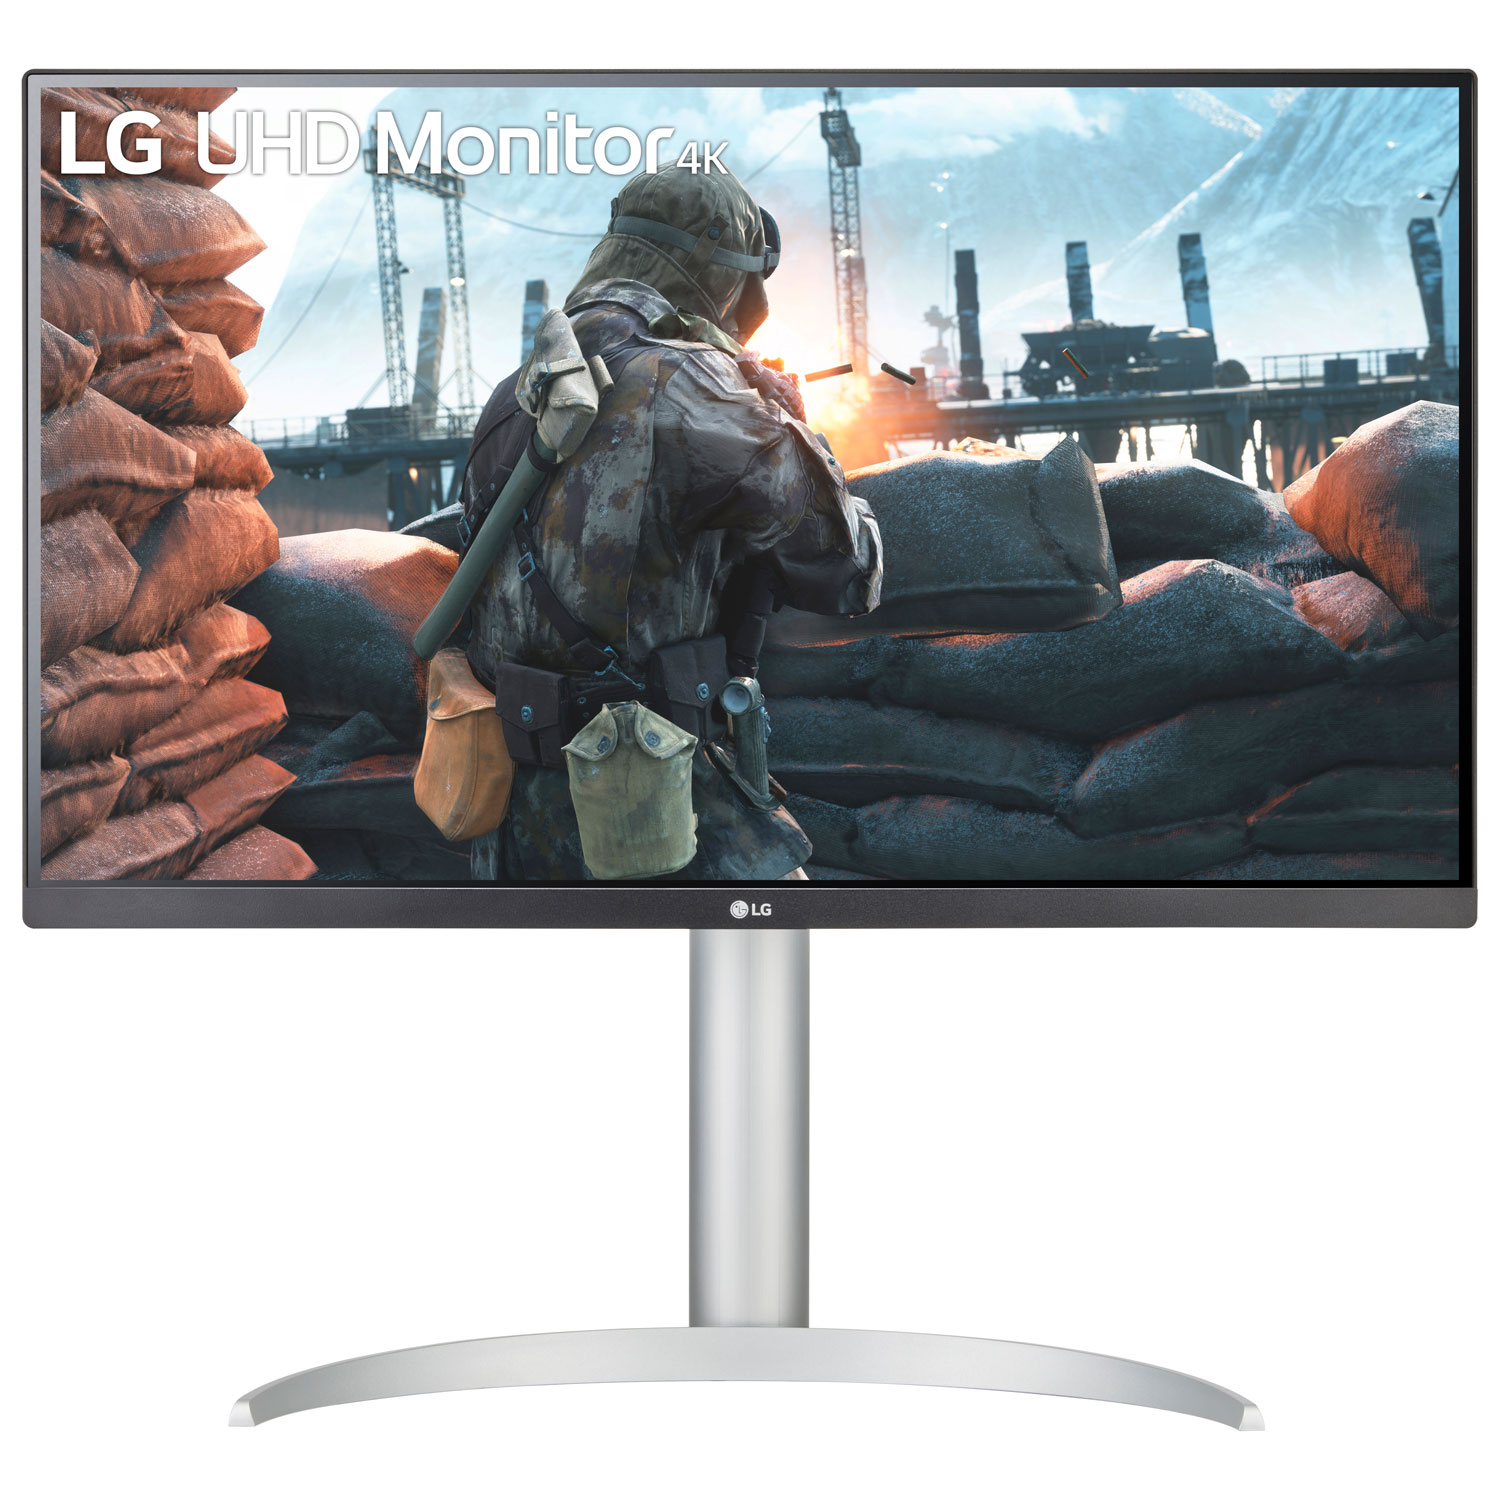 LG 27" 4K Ultra HD 60Hz 5ms GTG IPS LED FreeSync Monitor (27UP650-W) - White - Only at Best Buy